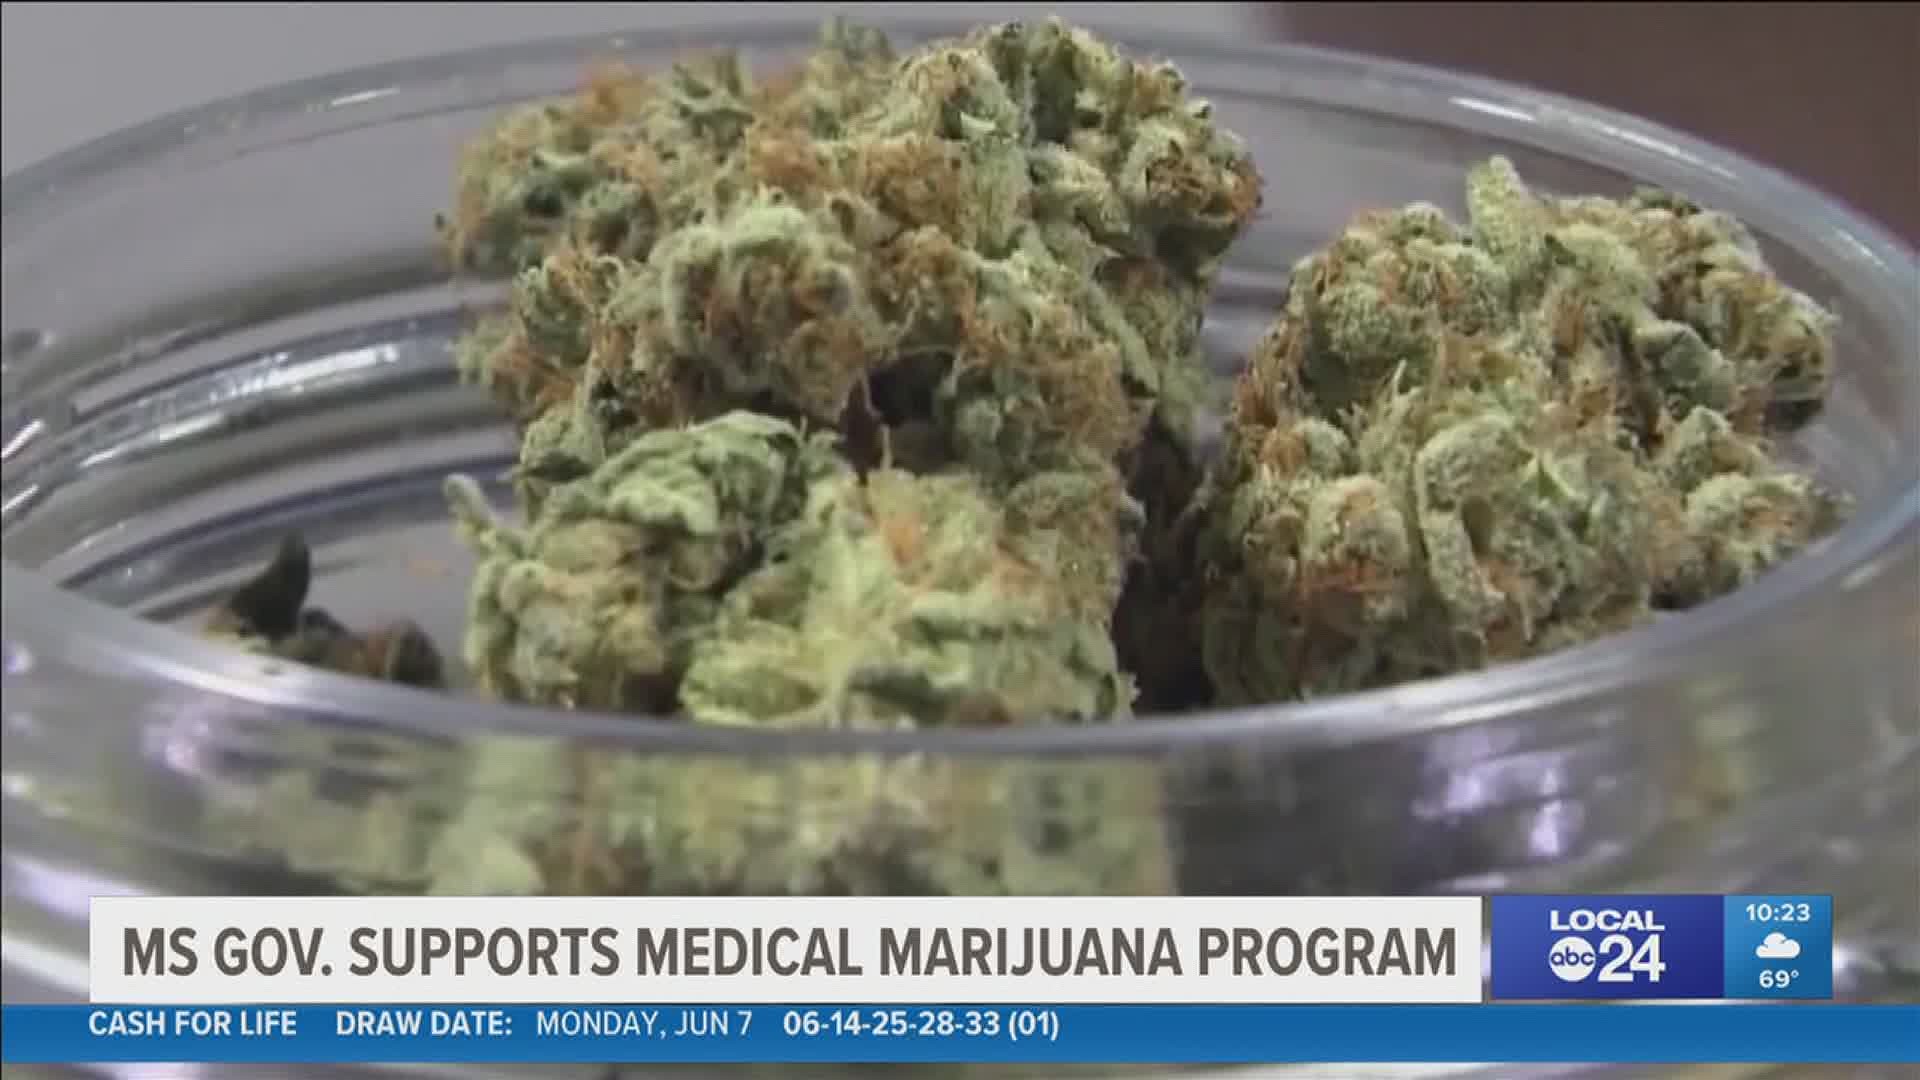 “Medical marijuana got 10,000 more votes than Donald Trump, and in Mississippi that's saying something,” said Local 24 News anchor Richard Ransom.